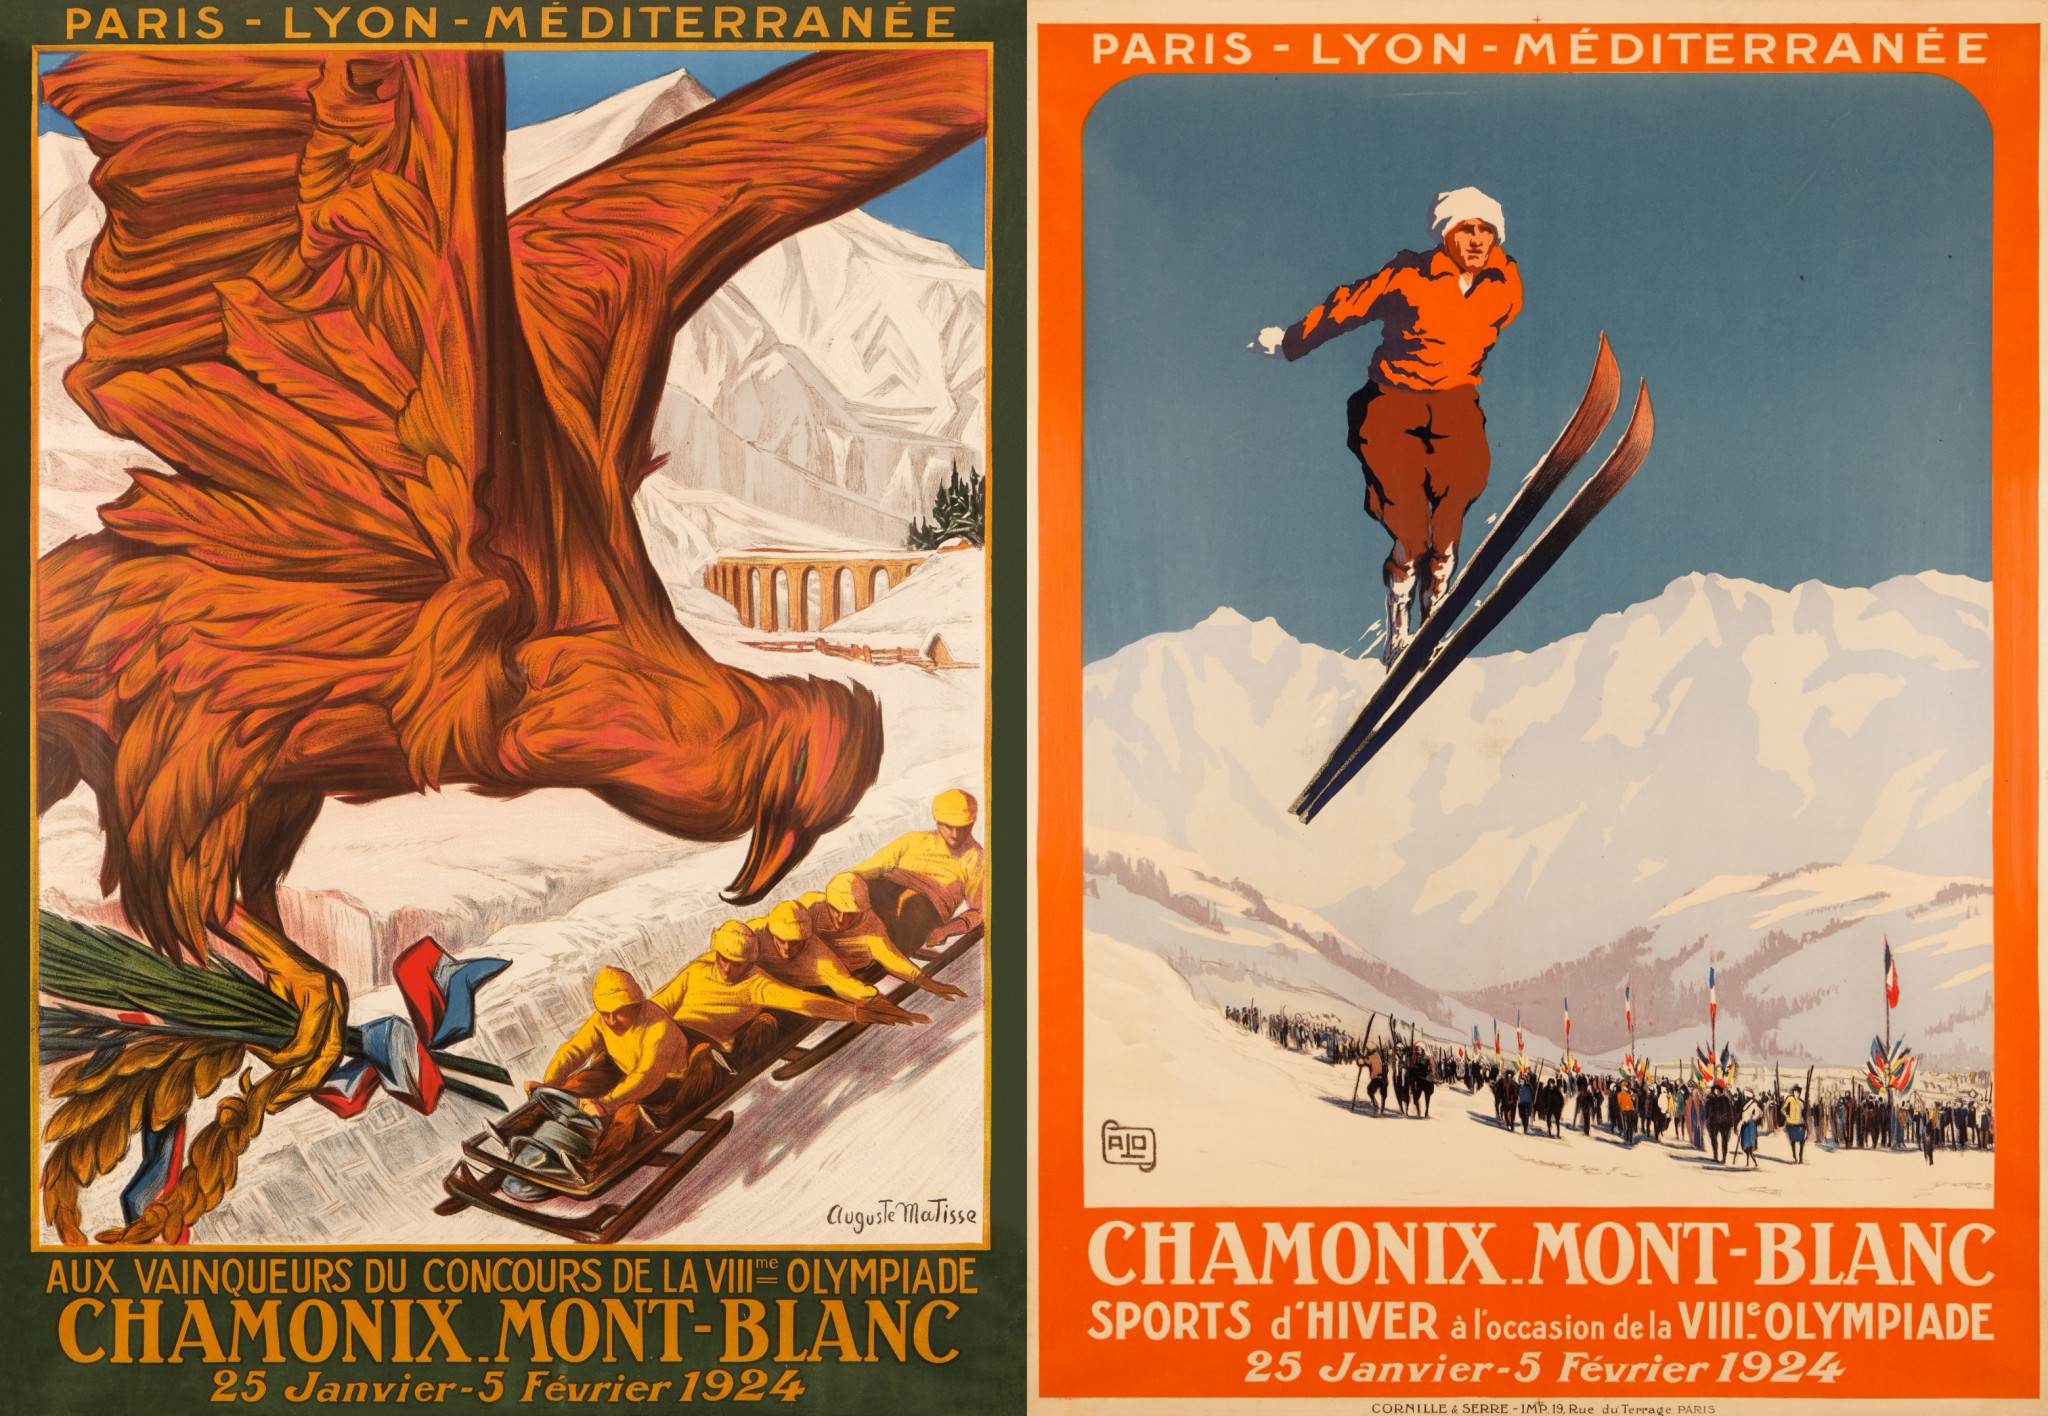 Chamonix hosted the first Winter Olympic Games in 1924 but claims it has no interest in bidding for them again in 2030 ©Olympic Museum